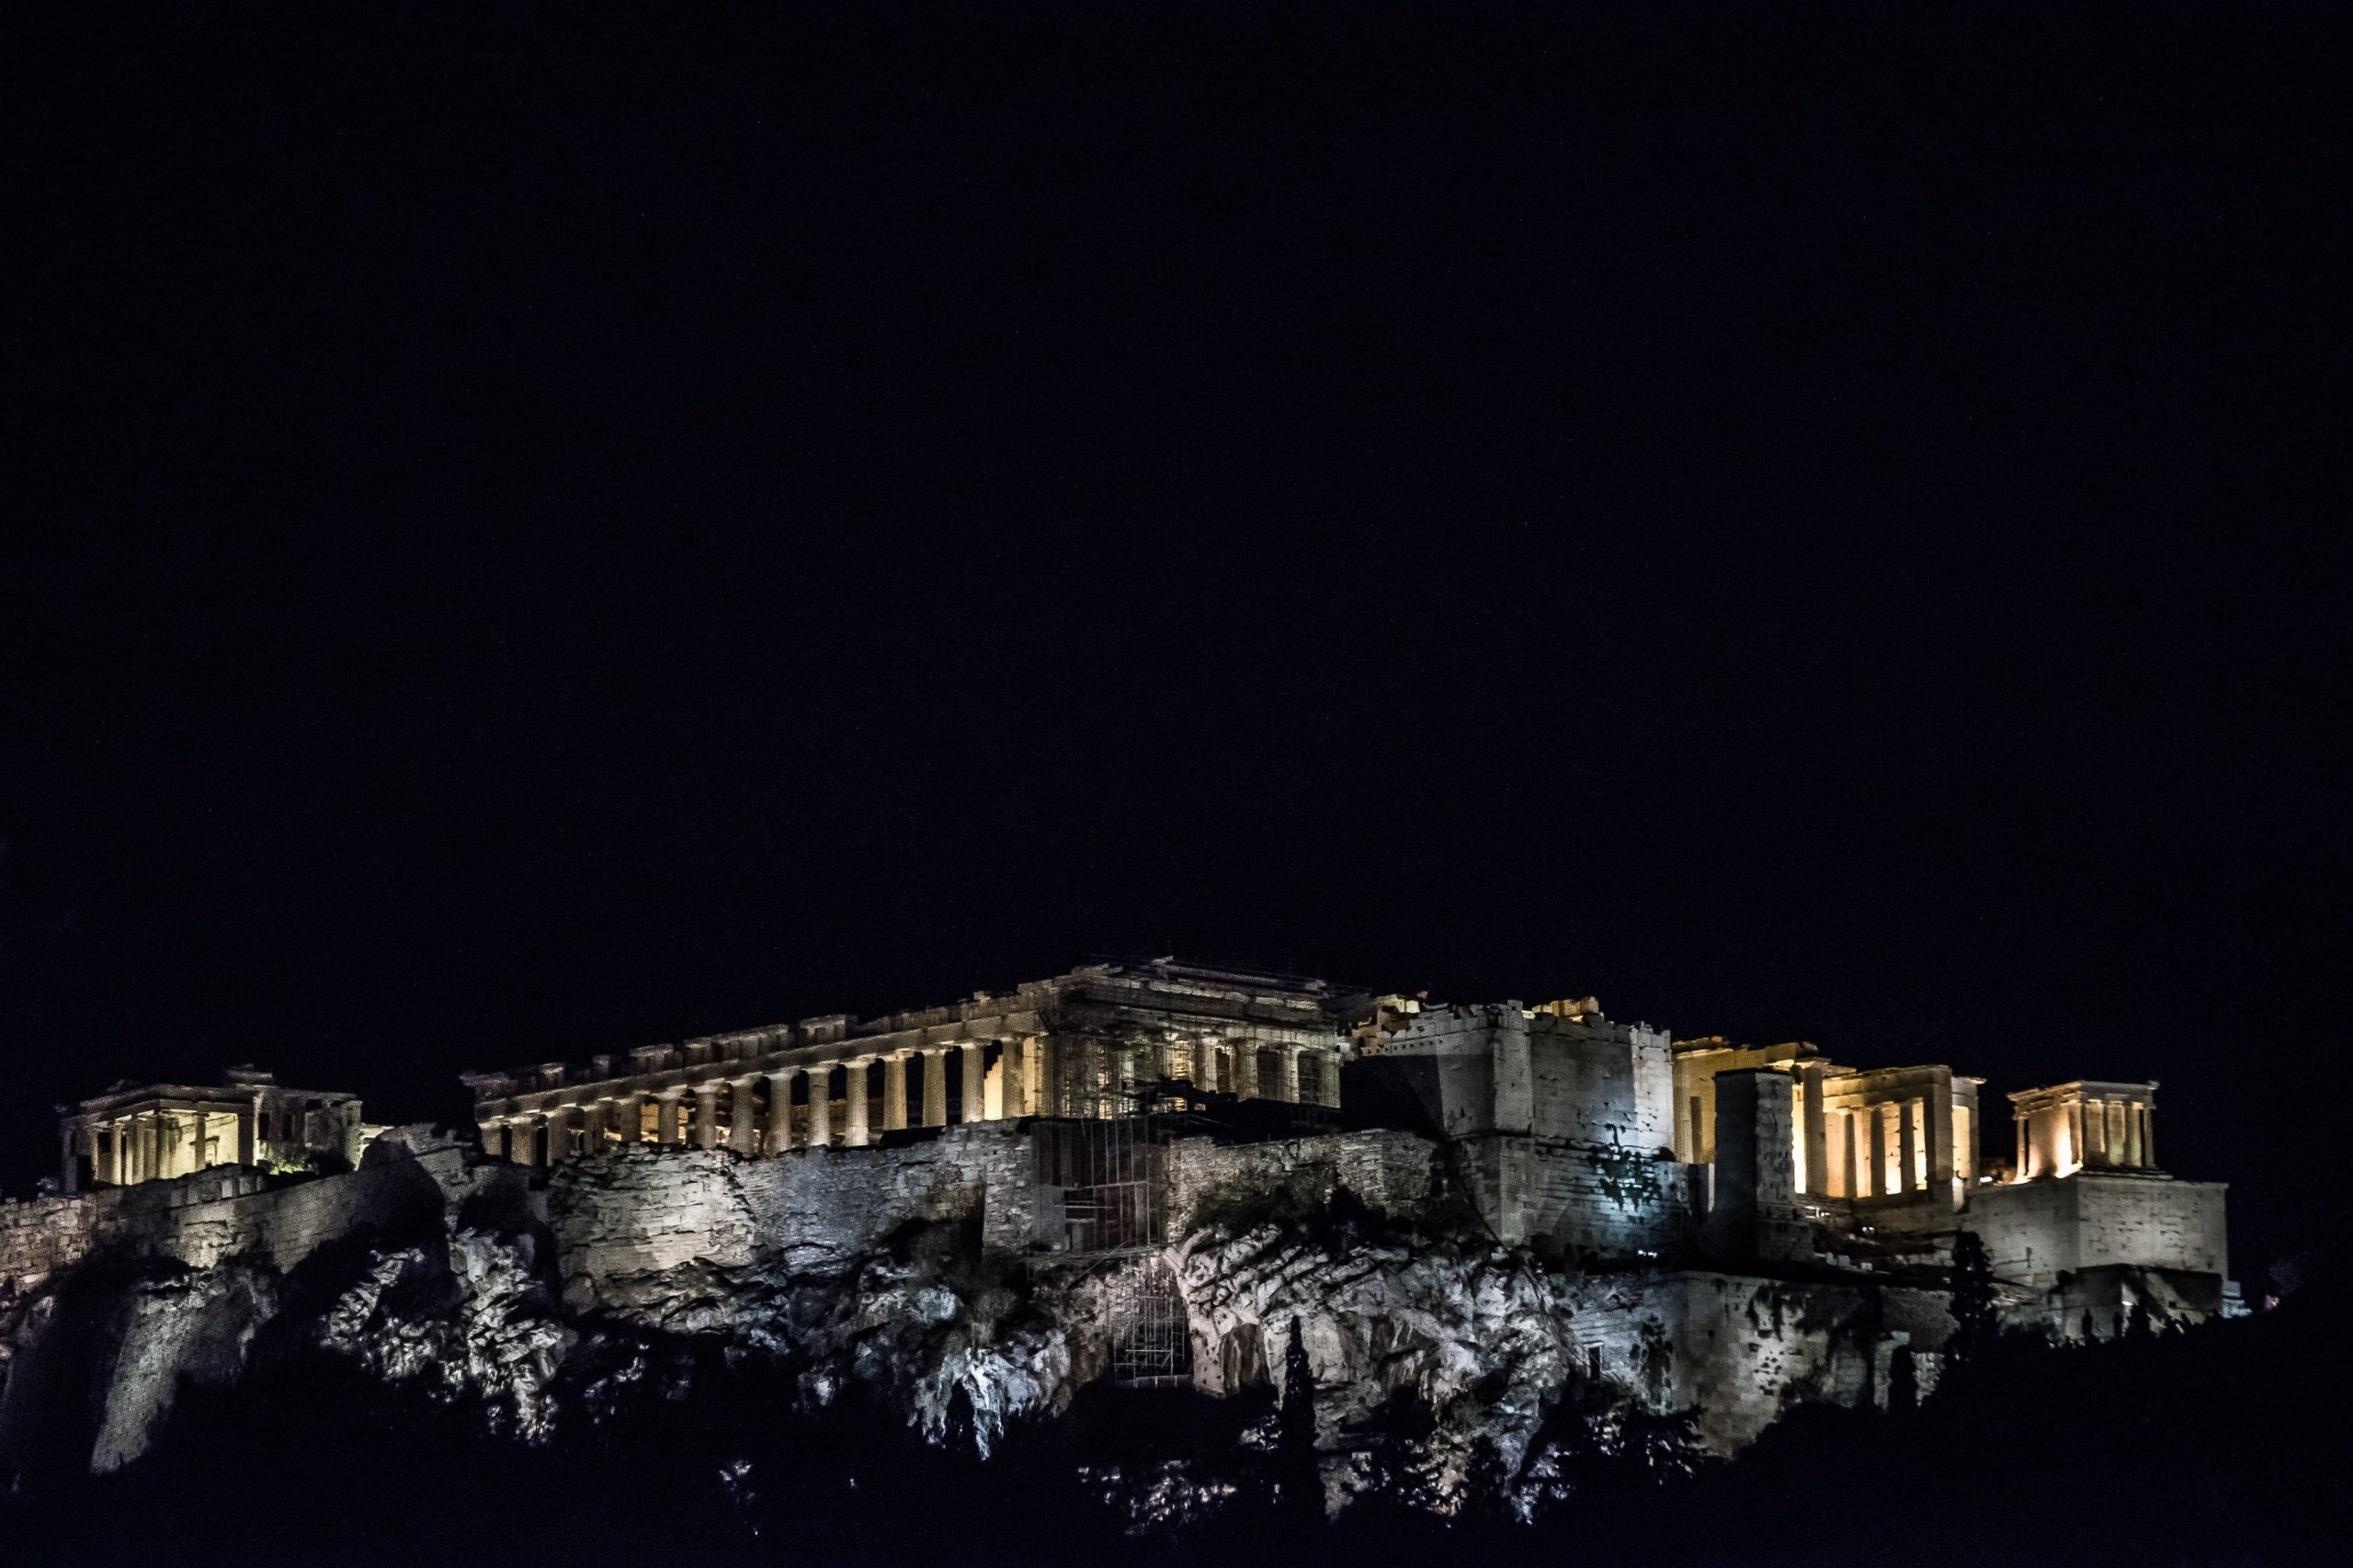 acropolis by night